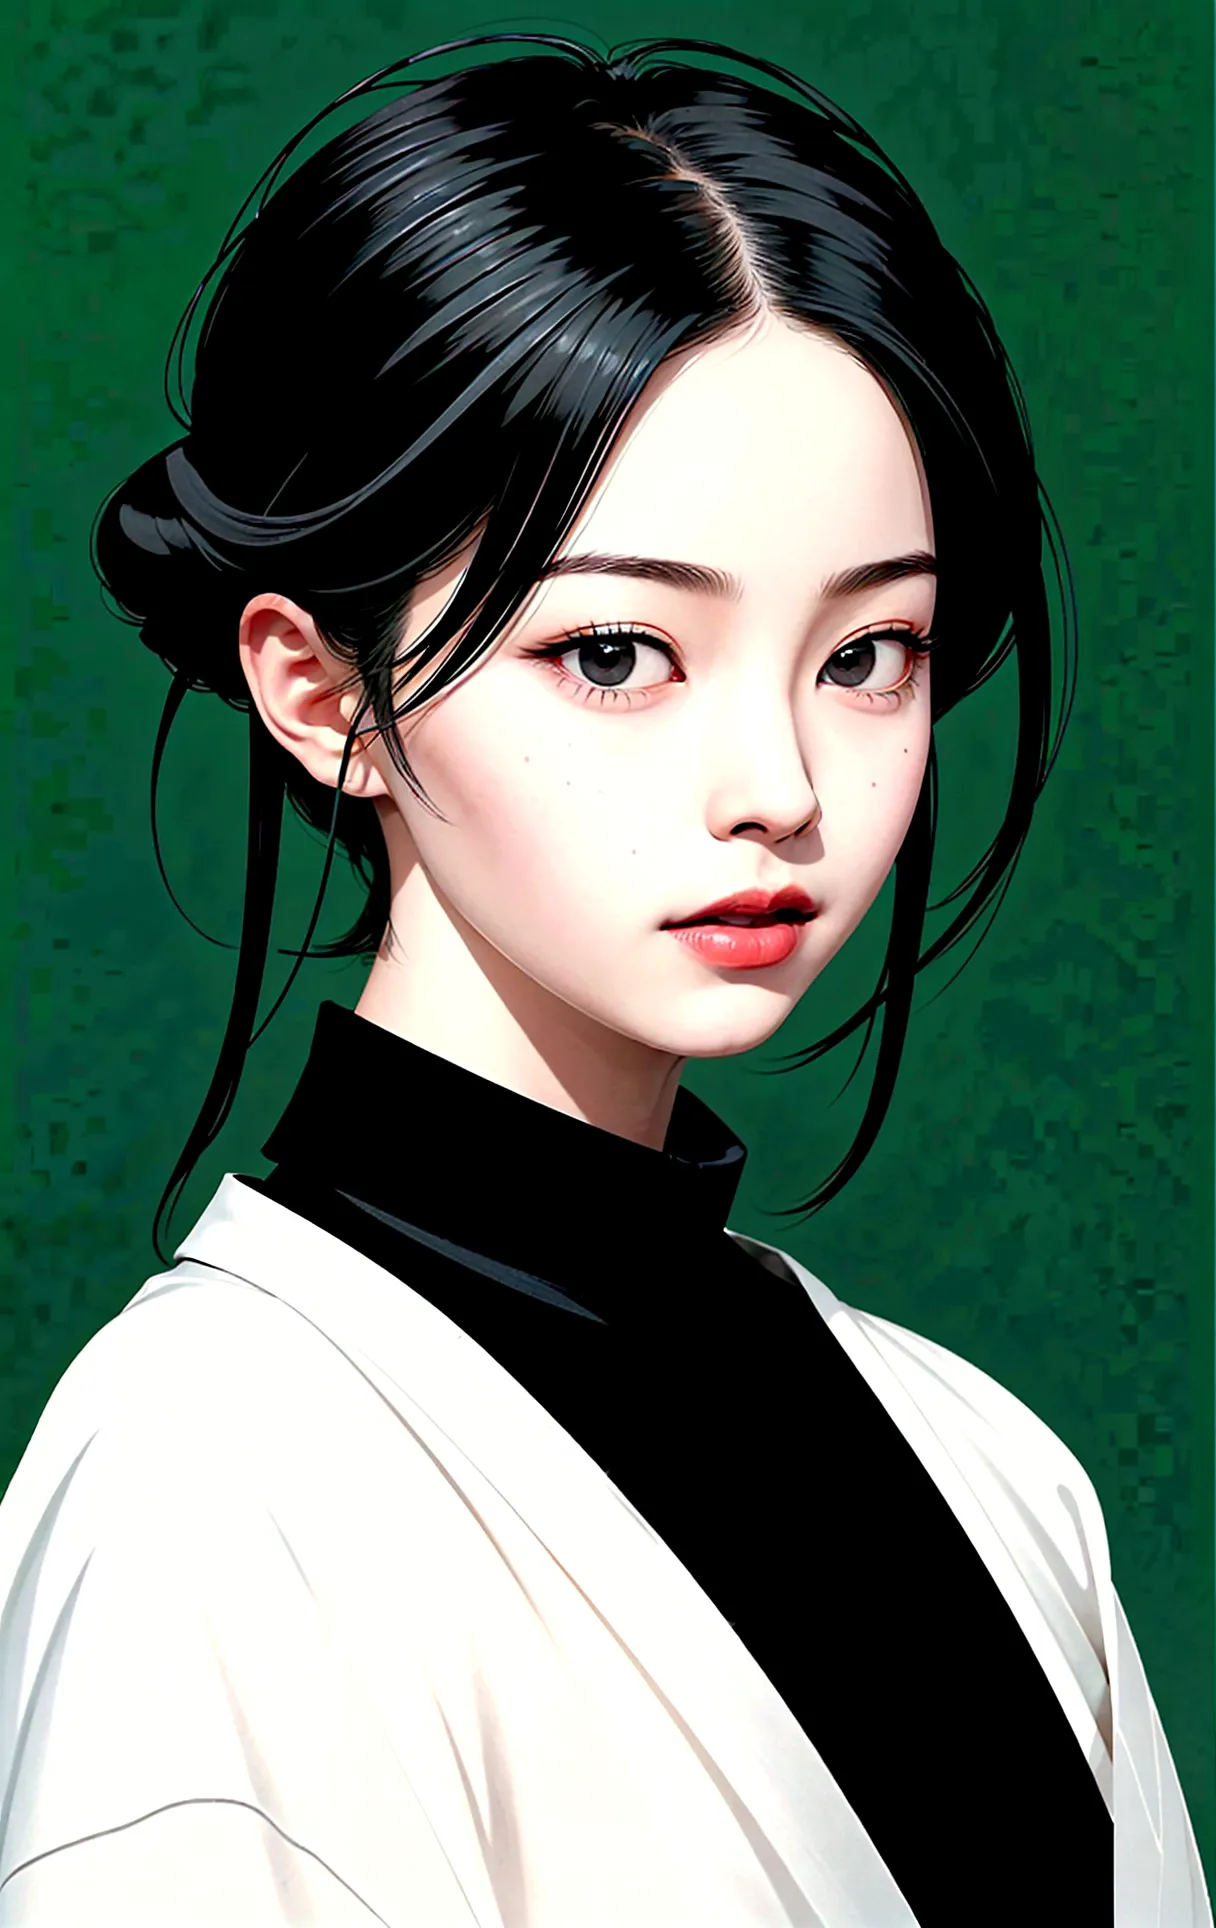 
chinese goddess sexy, Pretty face, Delicious company, Seductive figure, Wear a sexy hanfu dress. The artwork is created in a me...